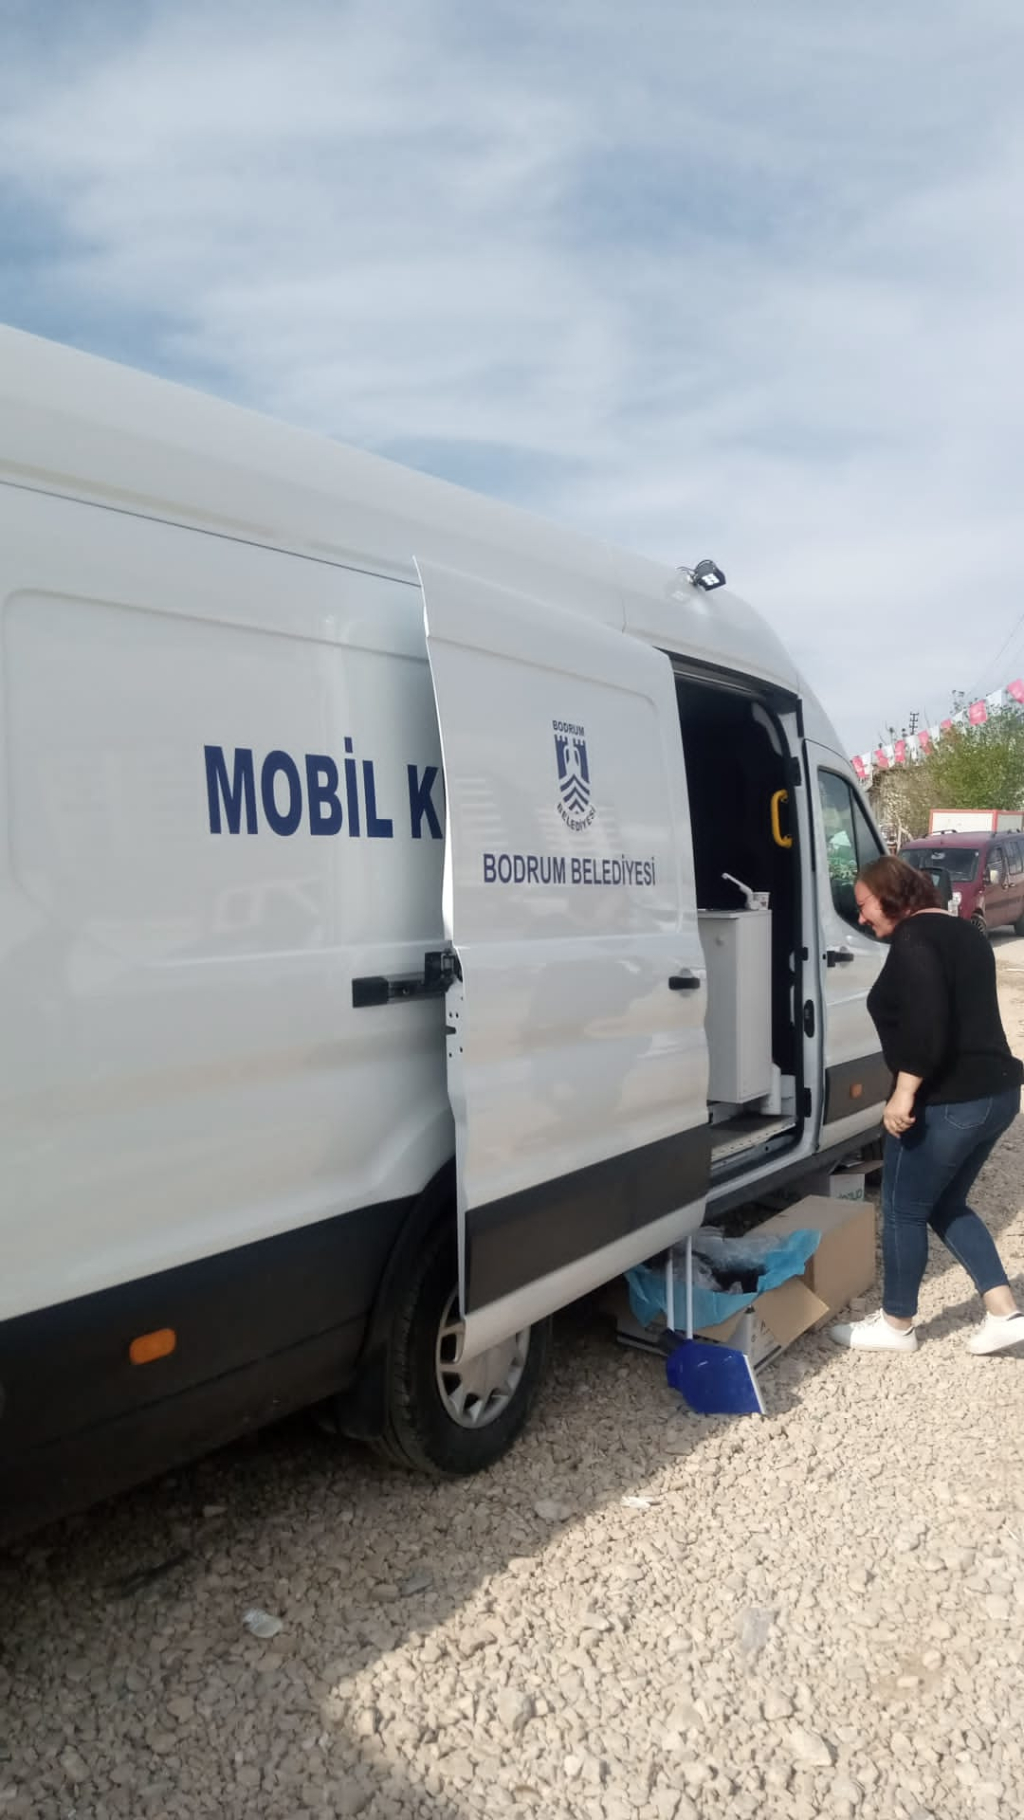 WE BROUGHT MOBILE HAIRDRESSING SERVICE TO MALATYA, LOCATED IN THE DISASTER REGION